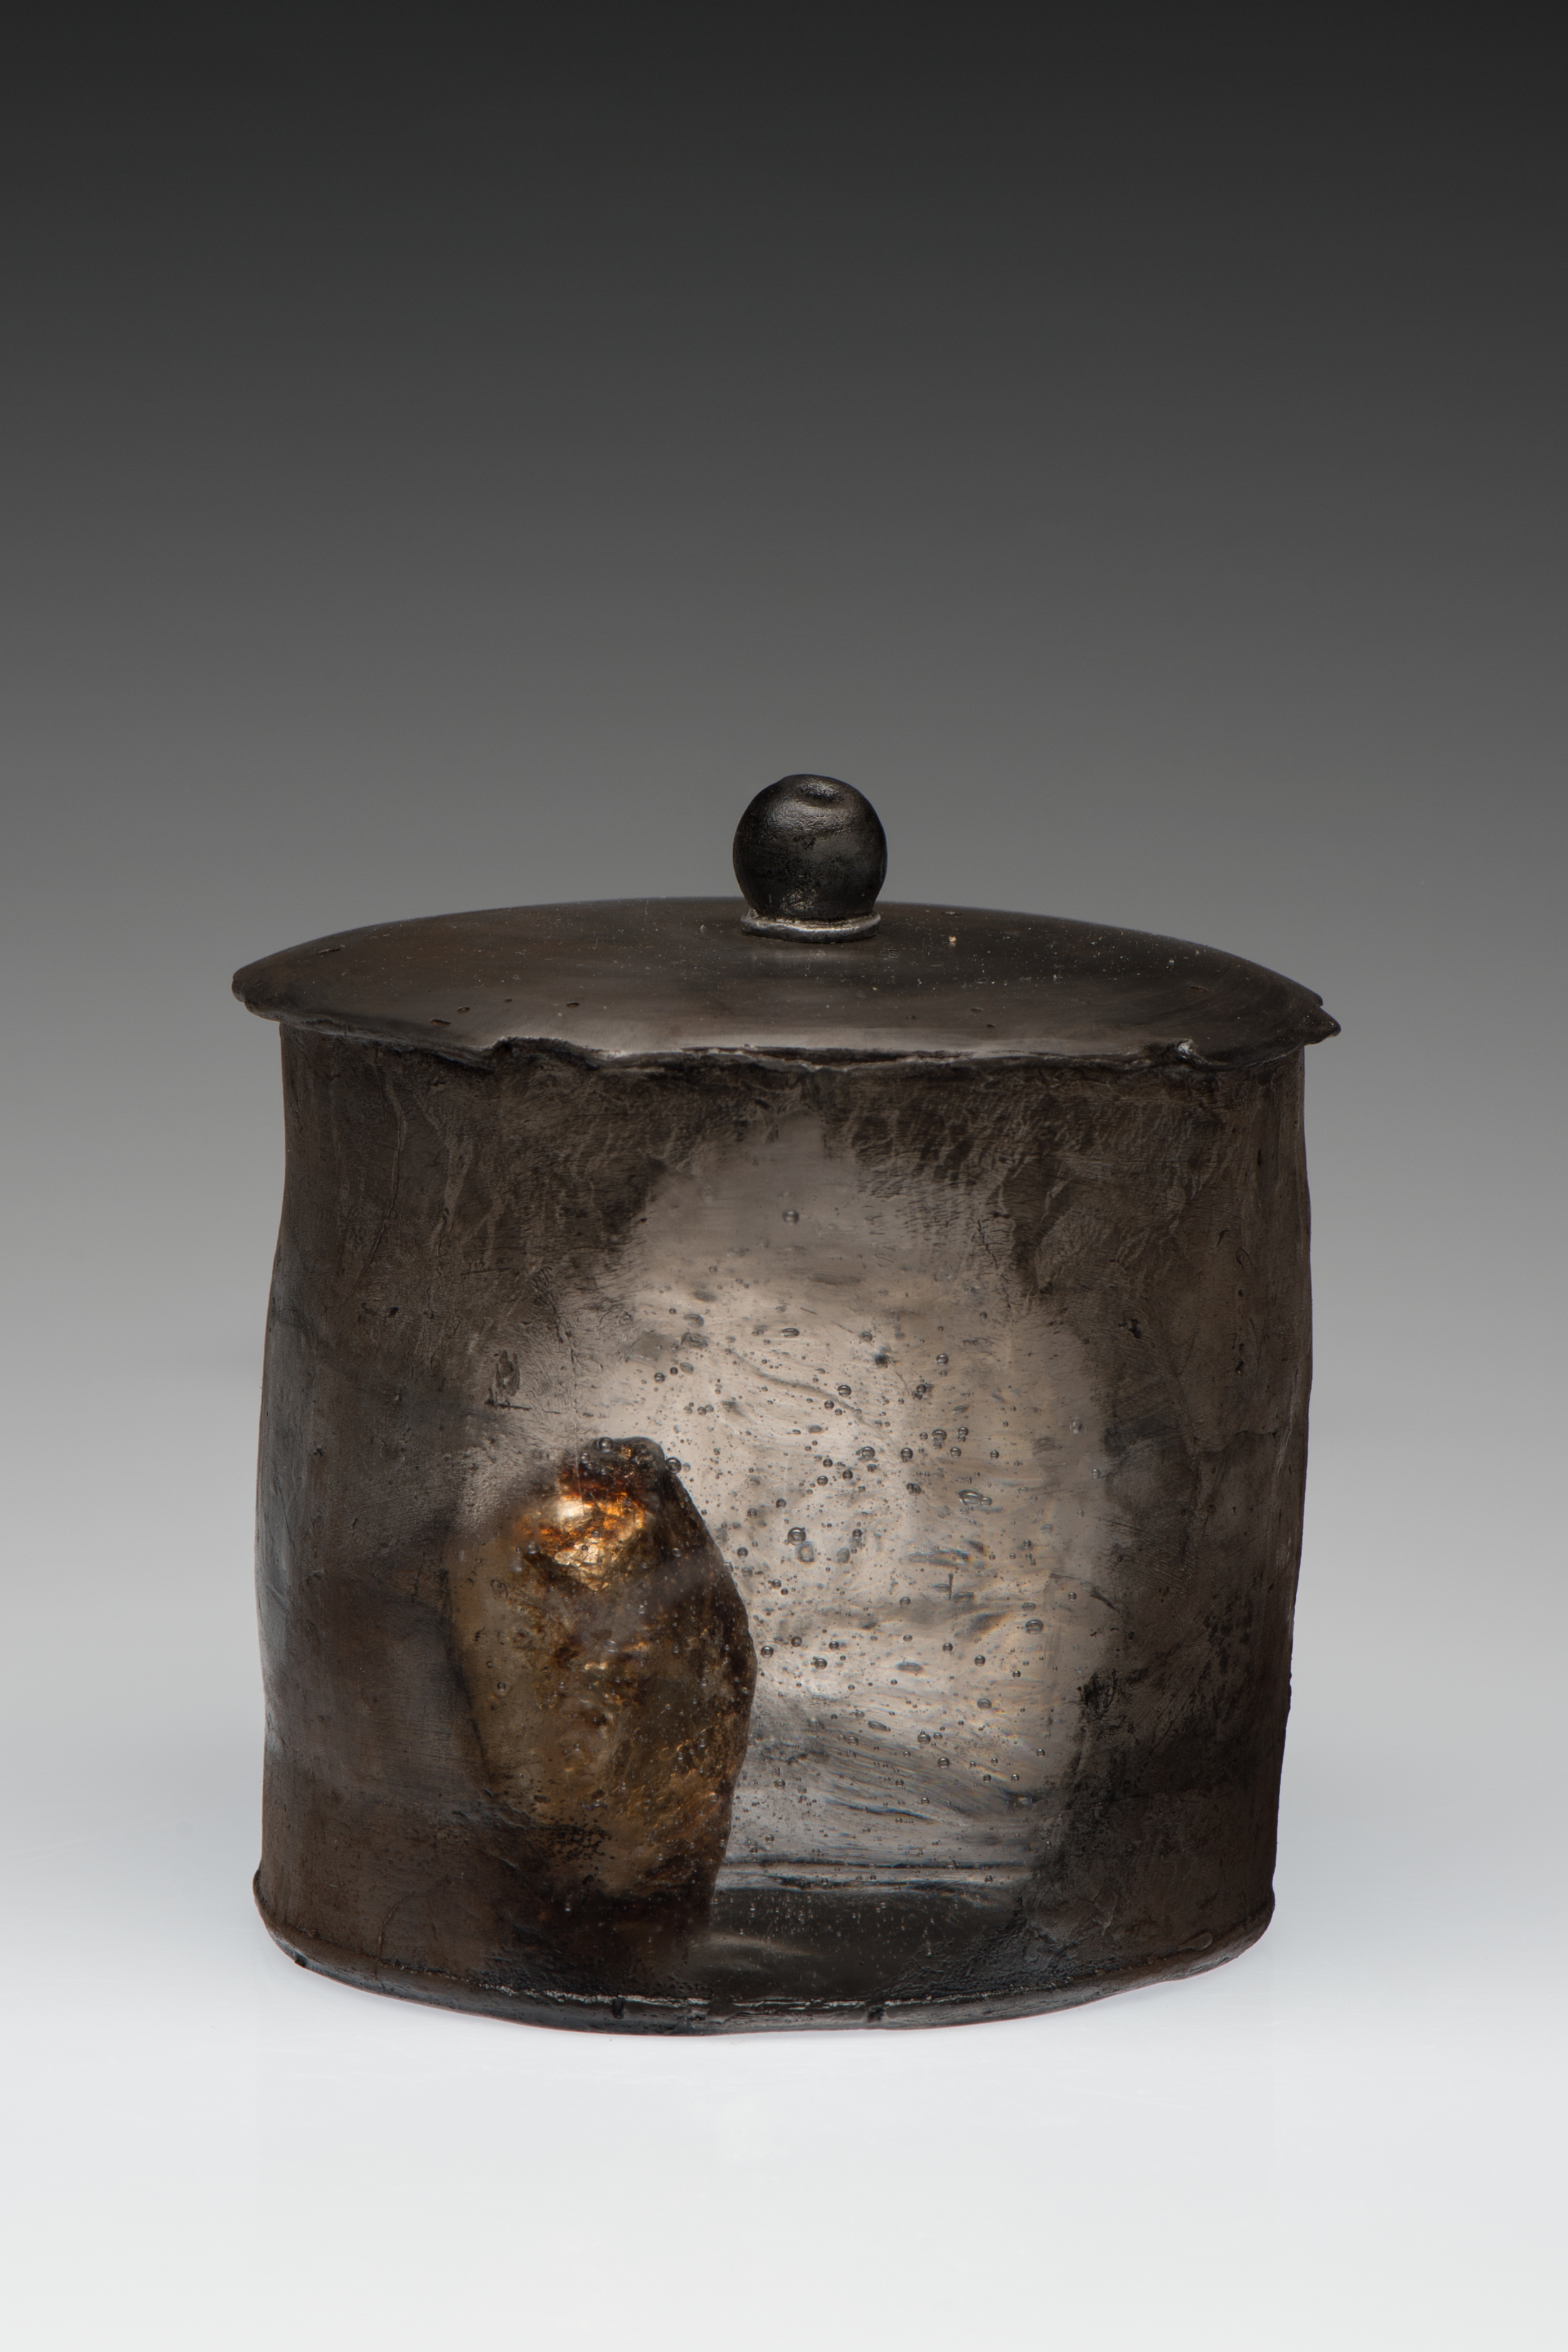  Echo from the Highland II No.1–No.12，2016 Kiln-formed glass, tea, silver leaf, wood,&nbsp;Overall installation dimension varies; Each: 5 x 5 x 5.5 inch 